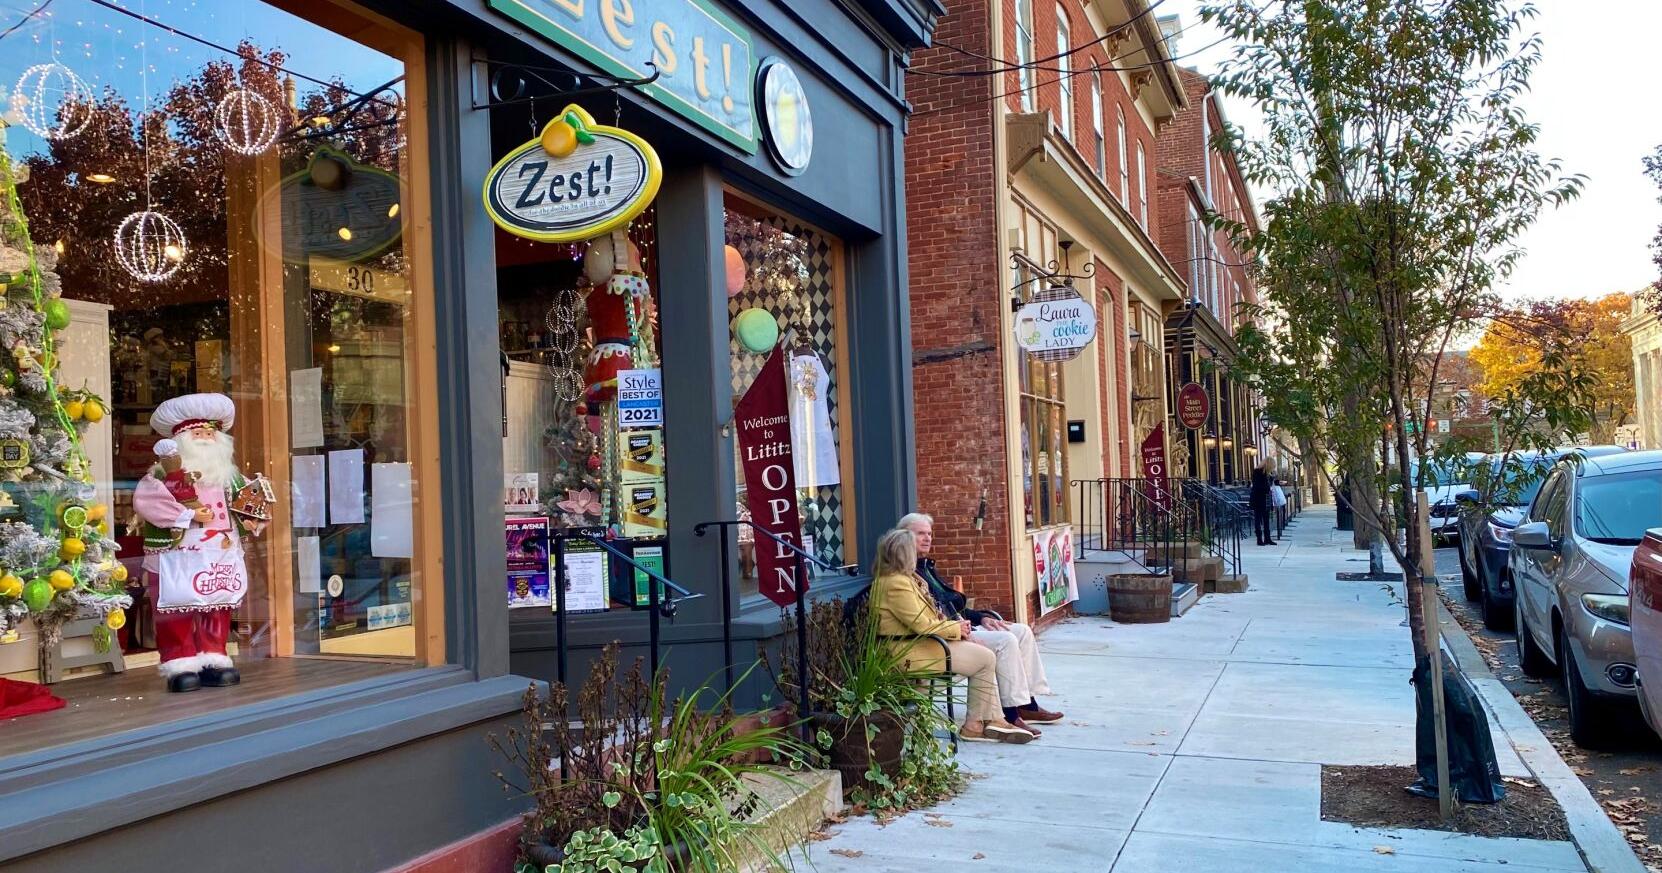 Progressive shopping card returns to Lititz for Small Business Saturday and holiday season